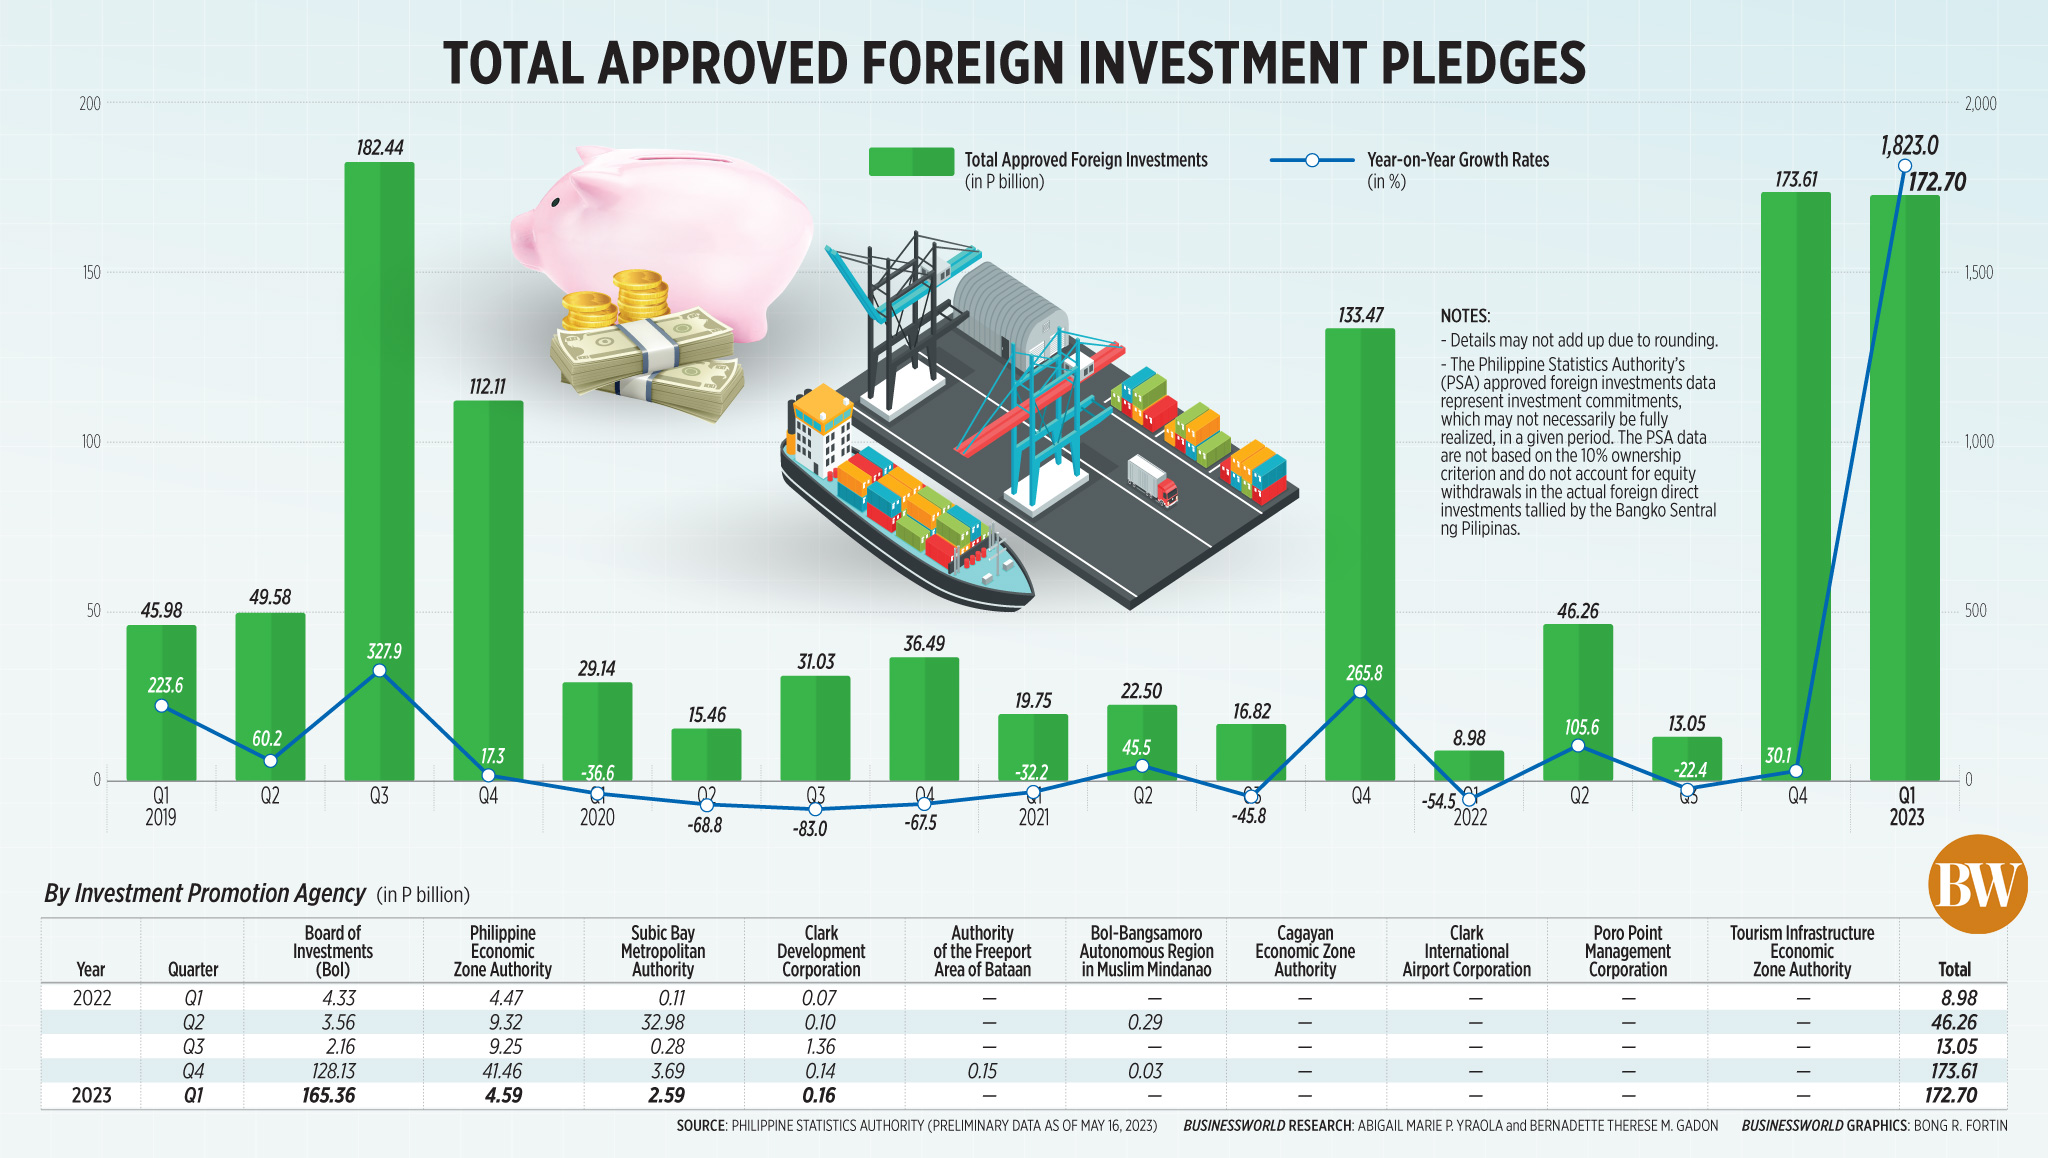 Total approved foreign investment pledges